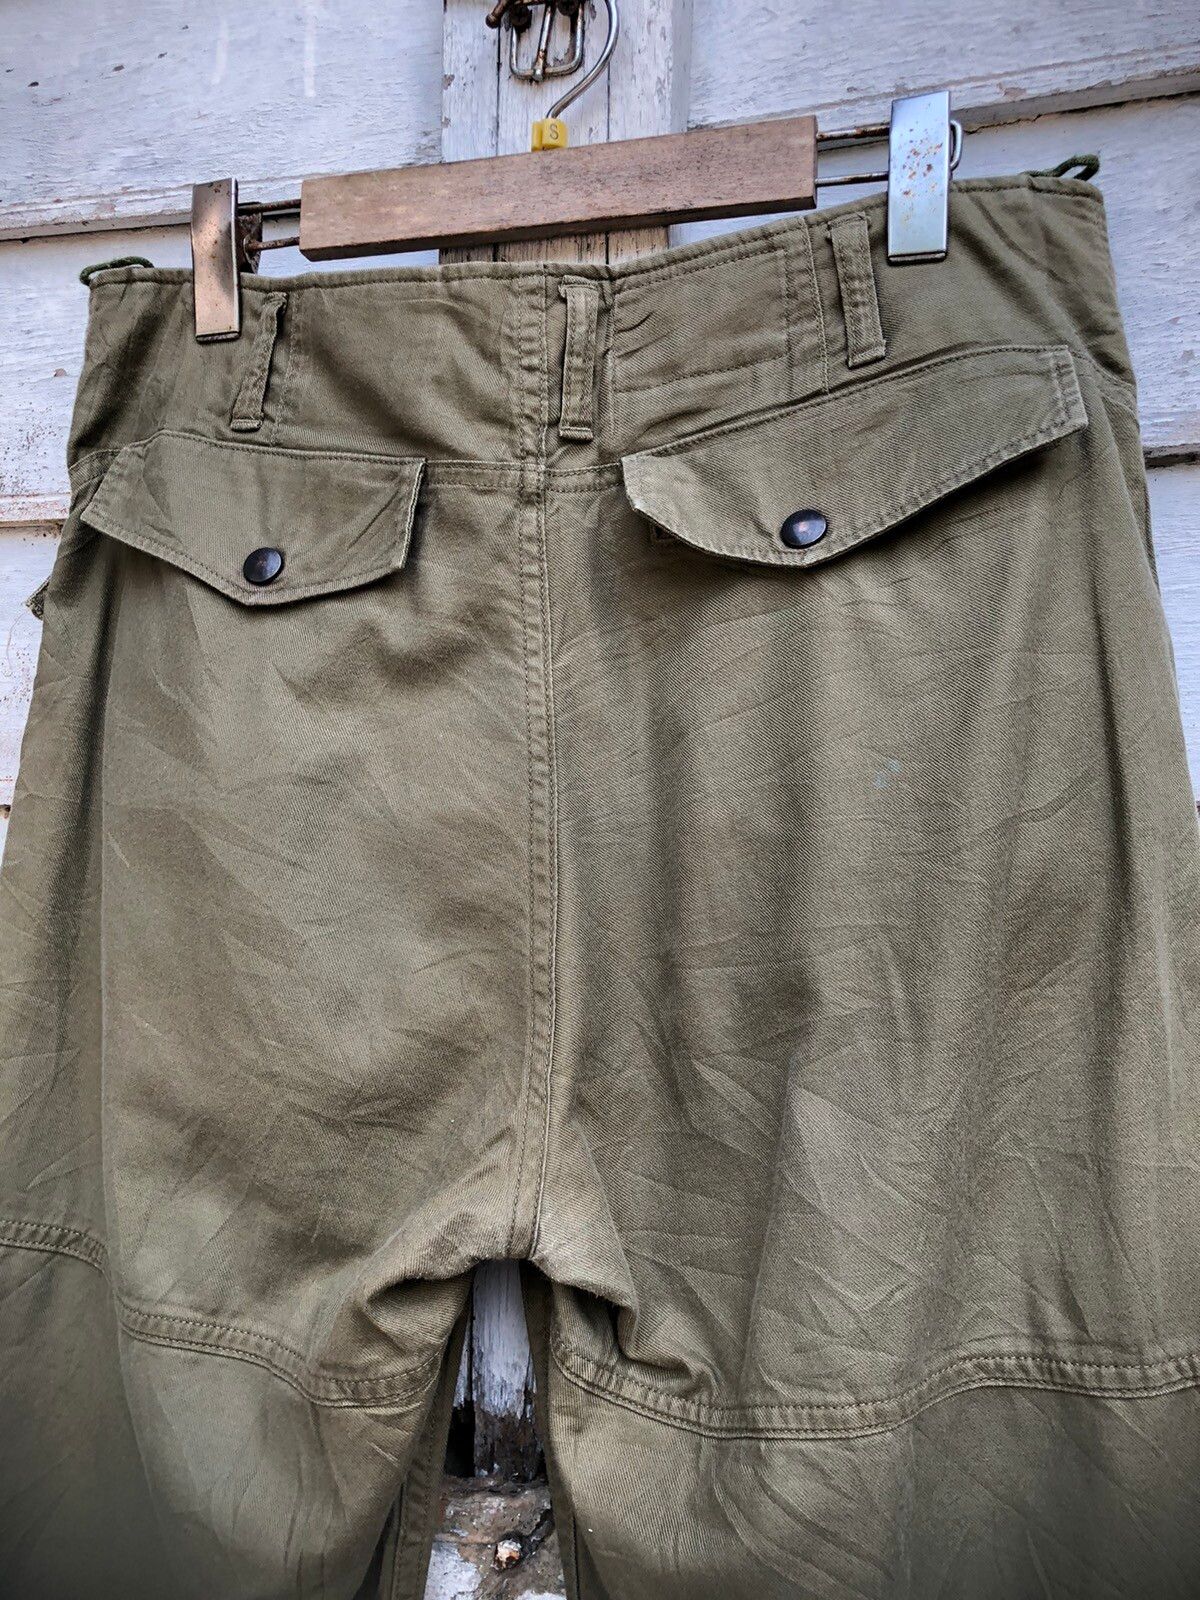 N. Hollywood Military Issues Trouser - 6